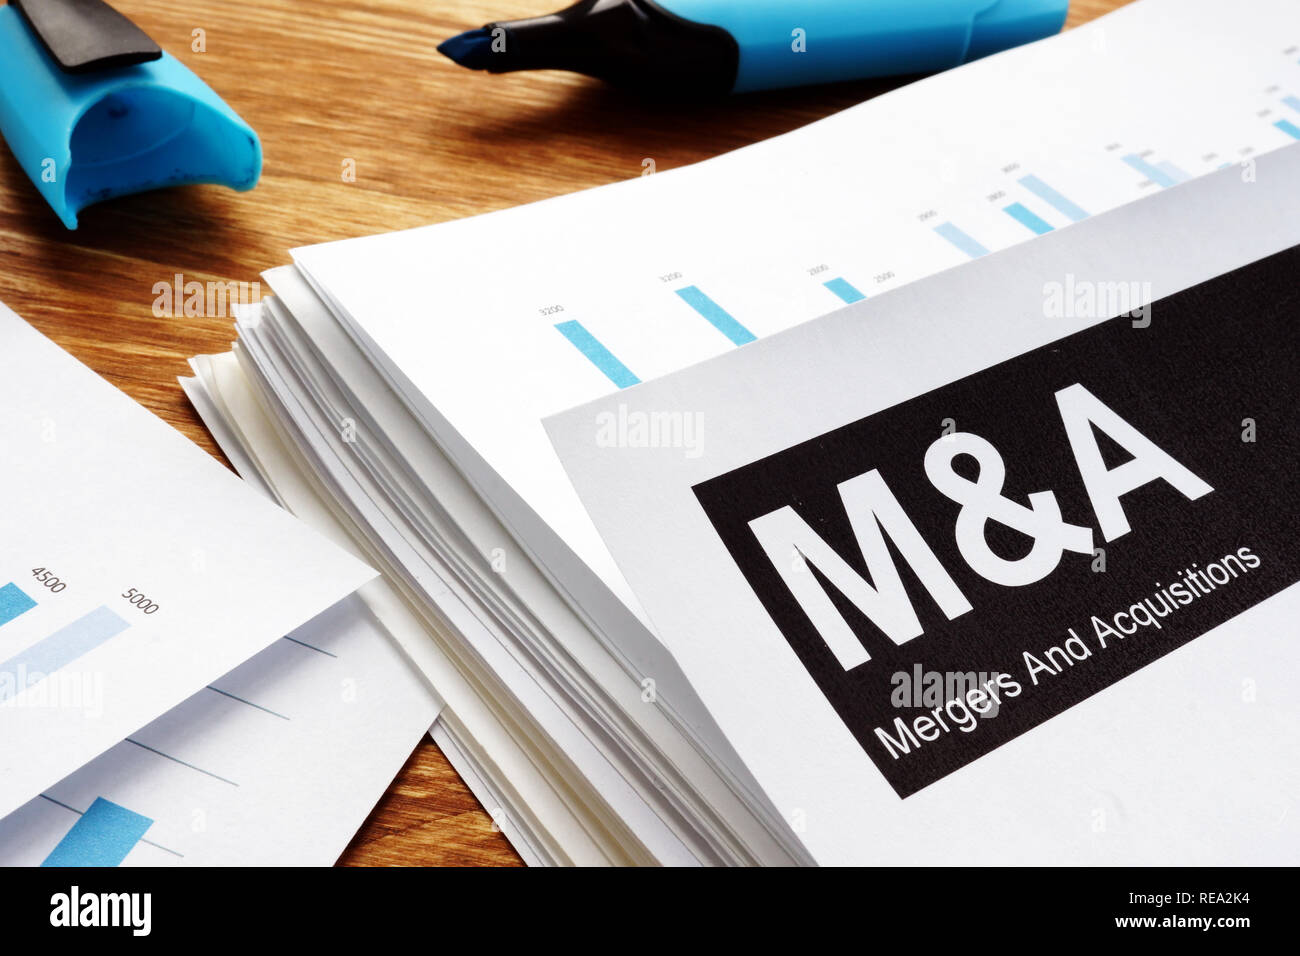 Documents about mergers and acquisitions m&a with a pen. Stock Photo